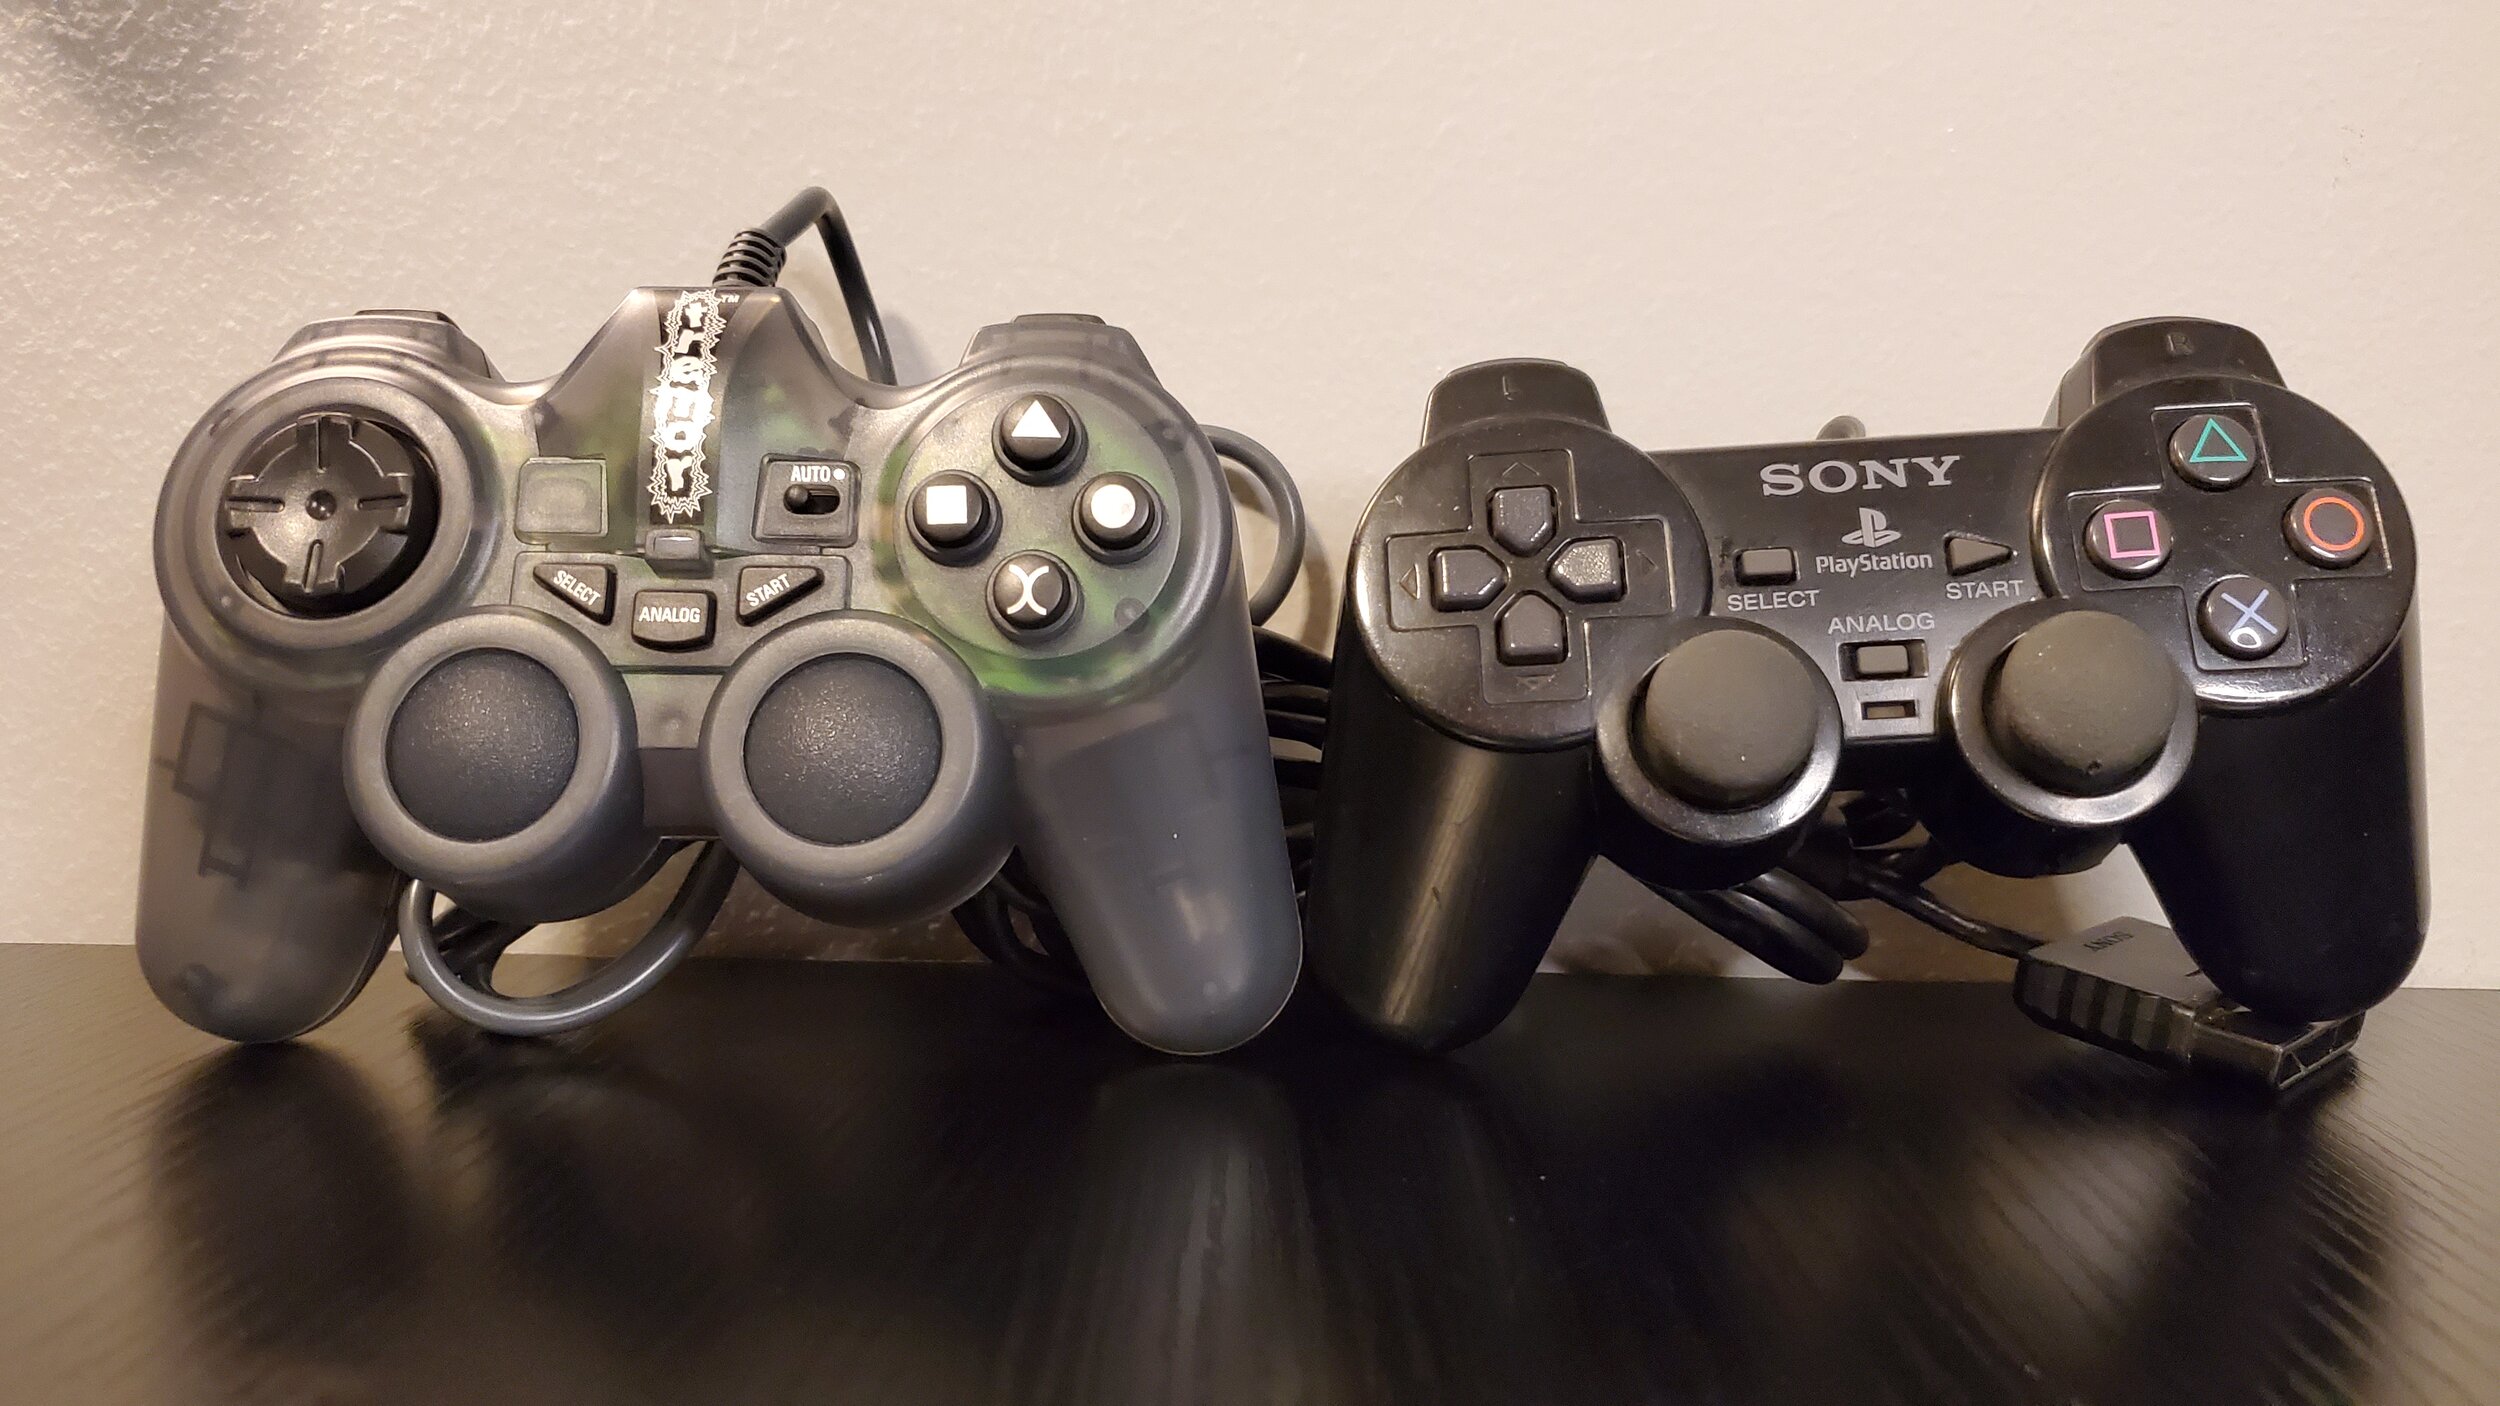 Review] Double Tremor Controller for PlayStation and PlayStation 2 (PS1 and PS2) — Game Controller